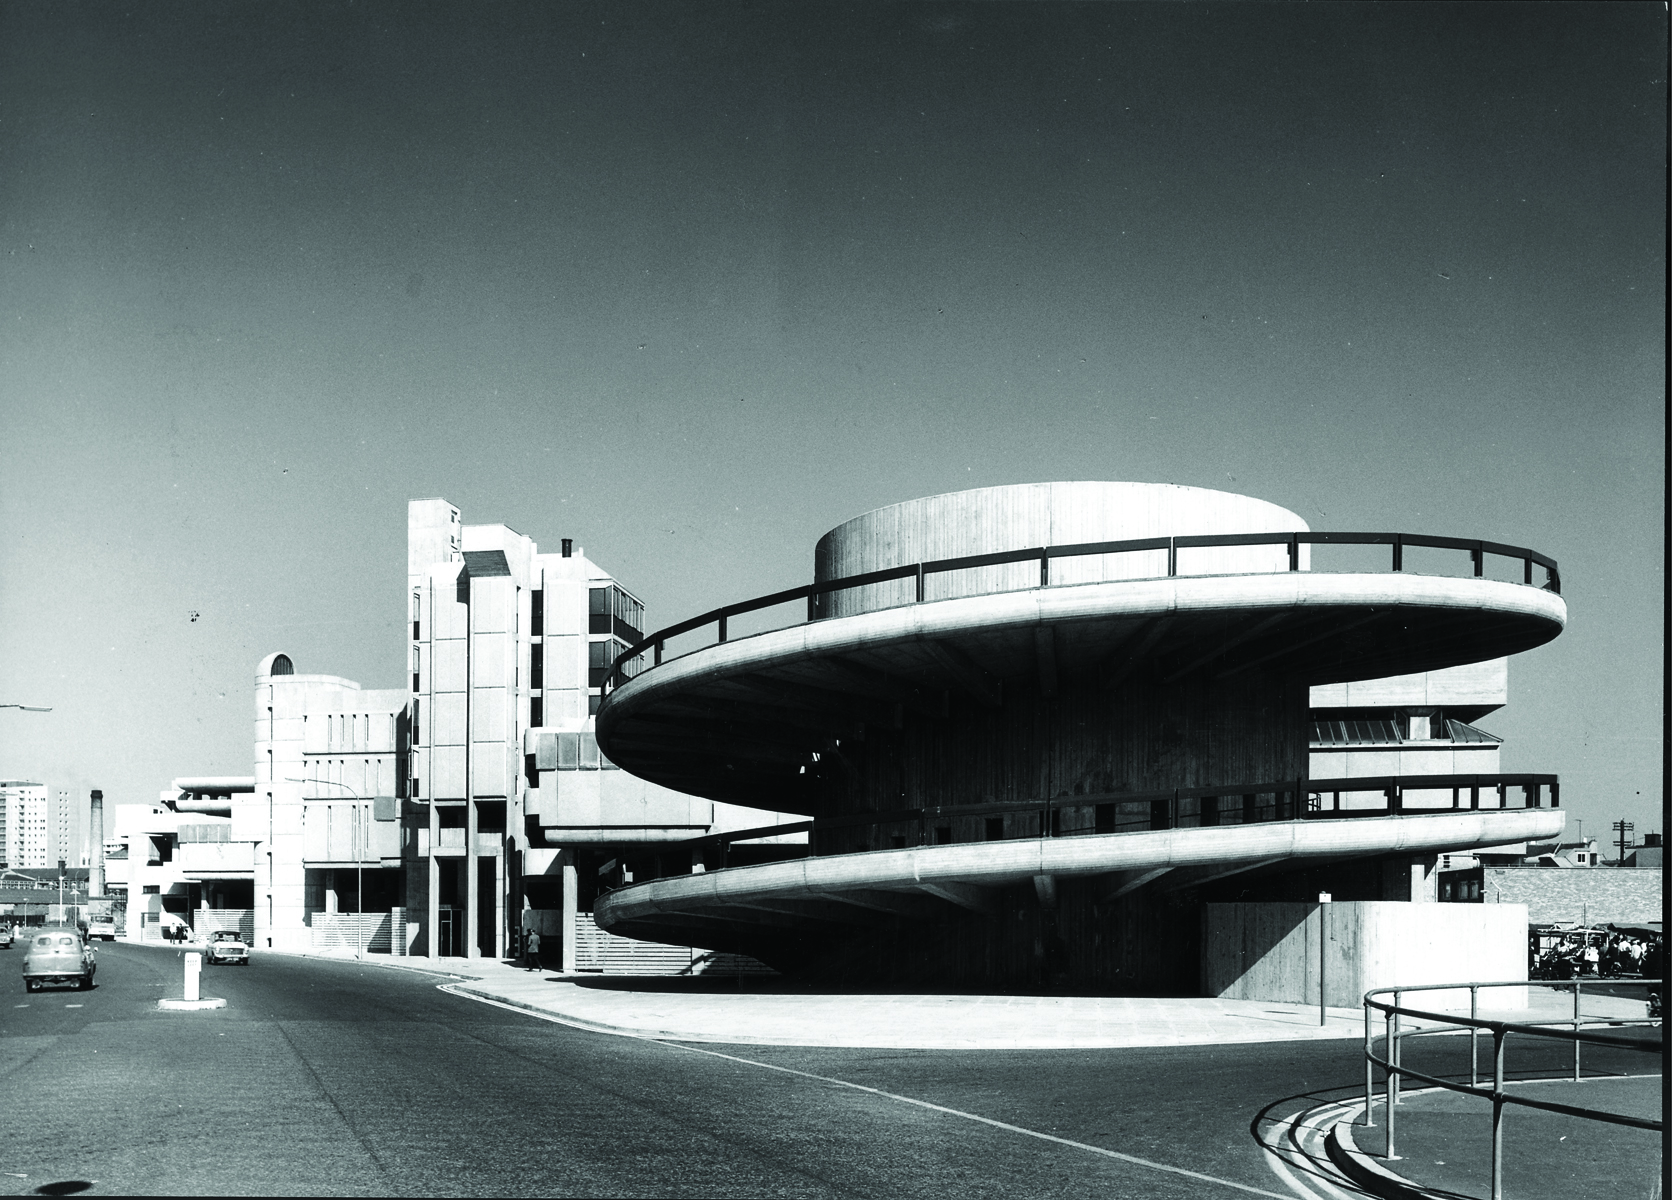 the disappearing architecture of post-war Britain Lost future 